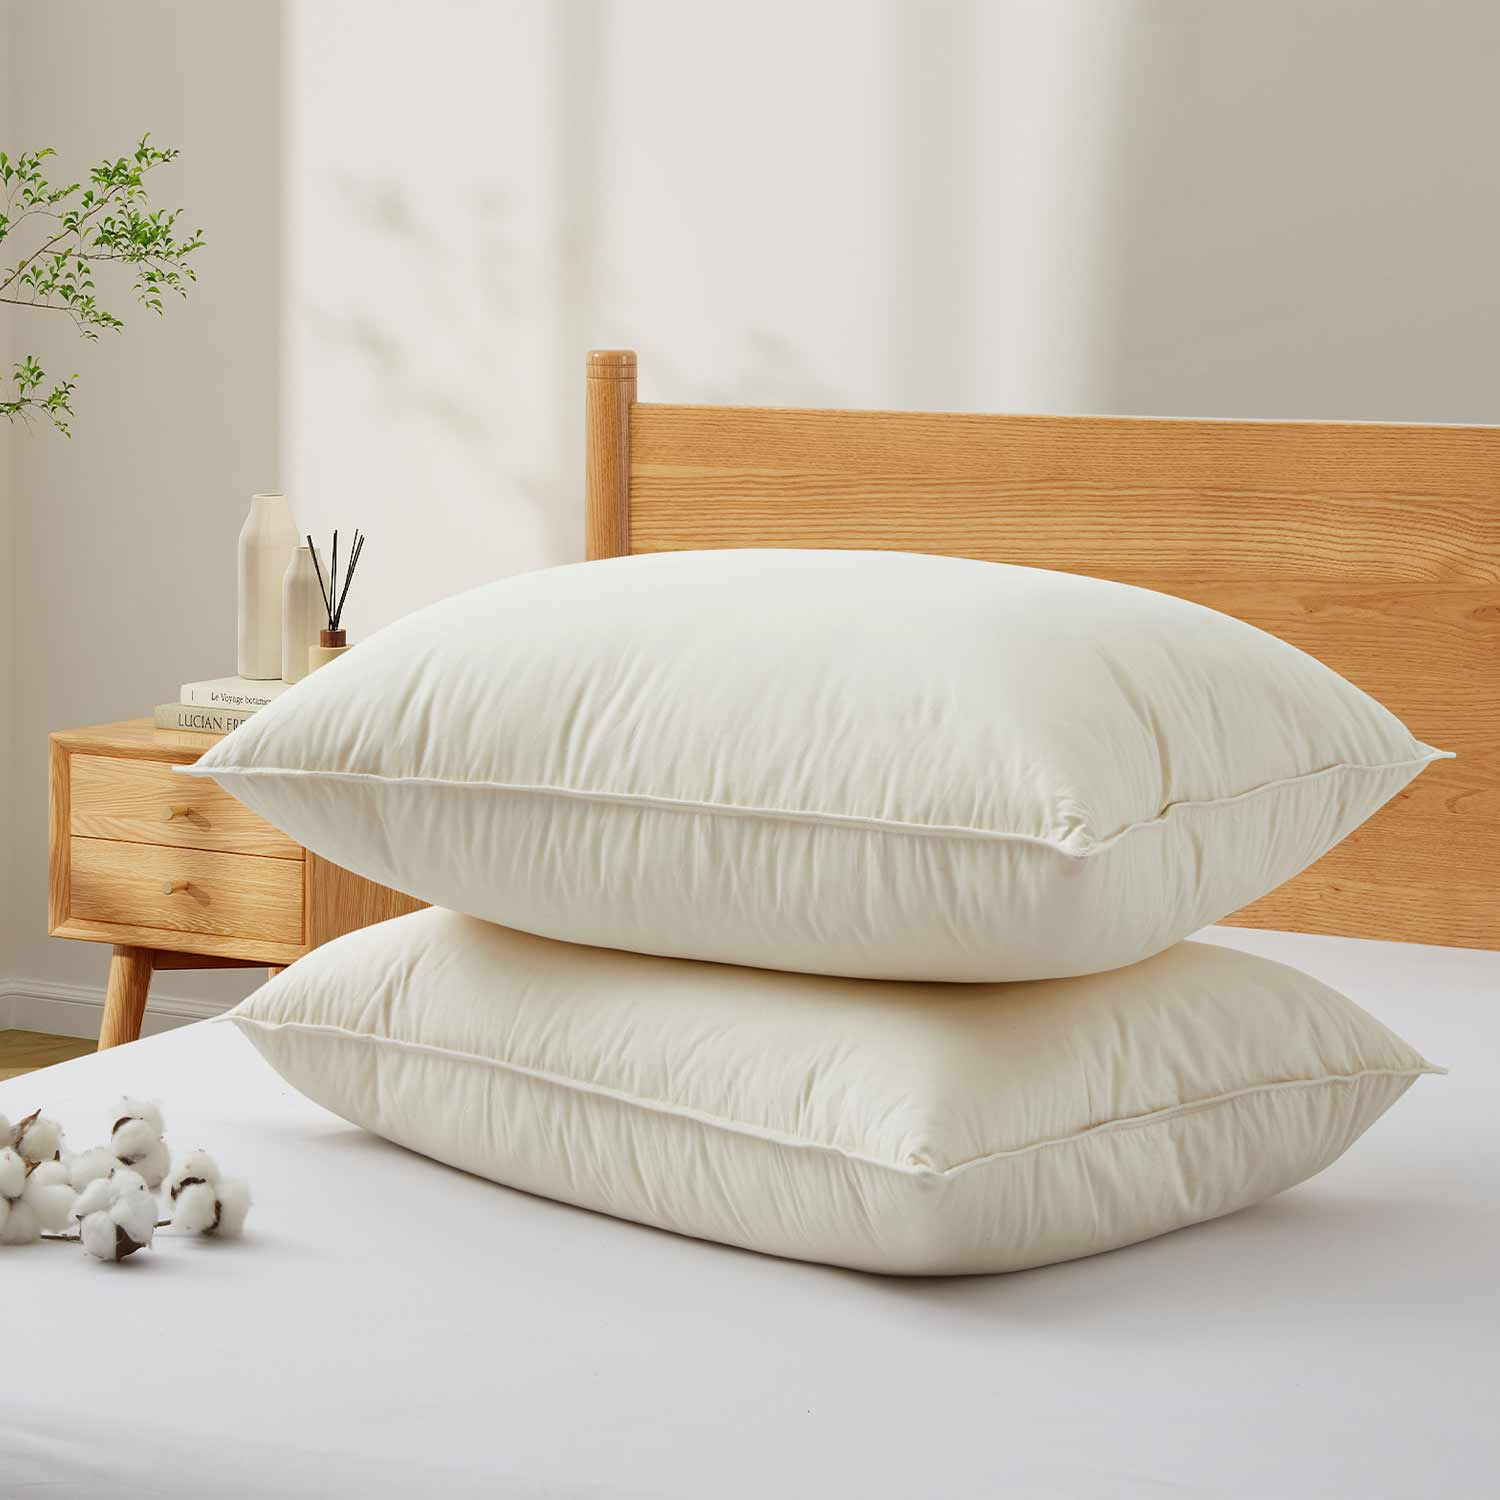 How long should a goose down sleeping pillow last?